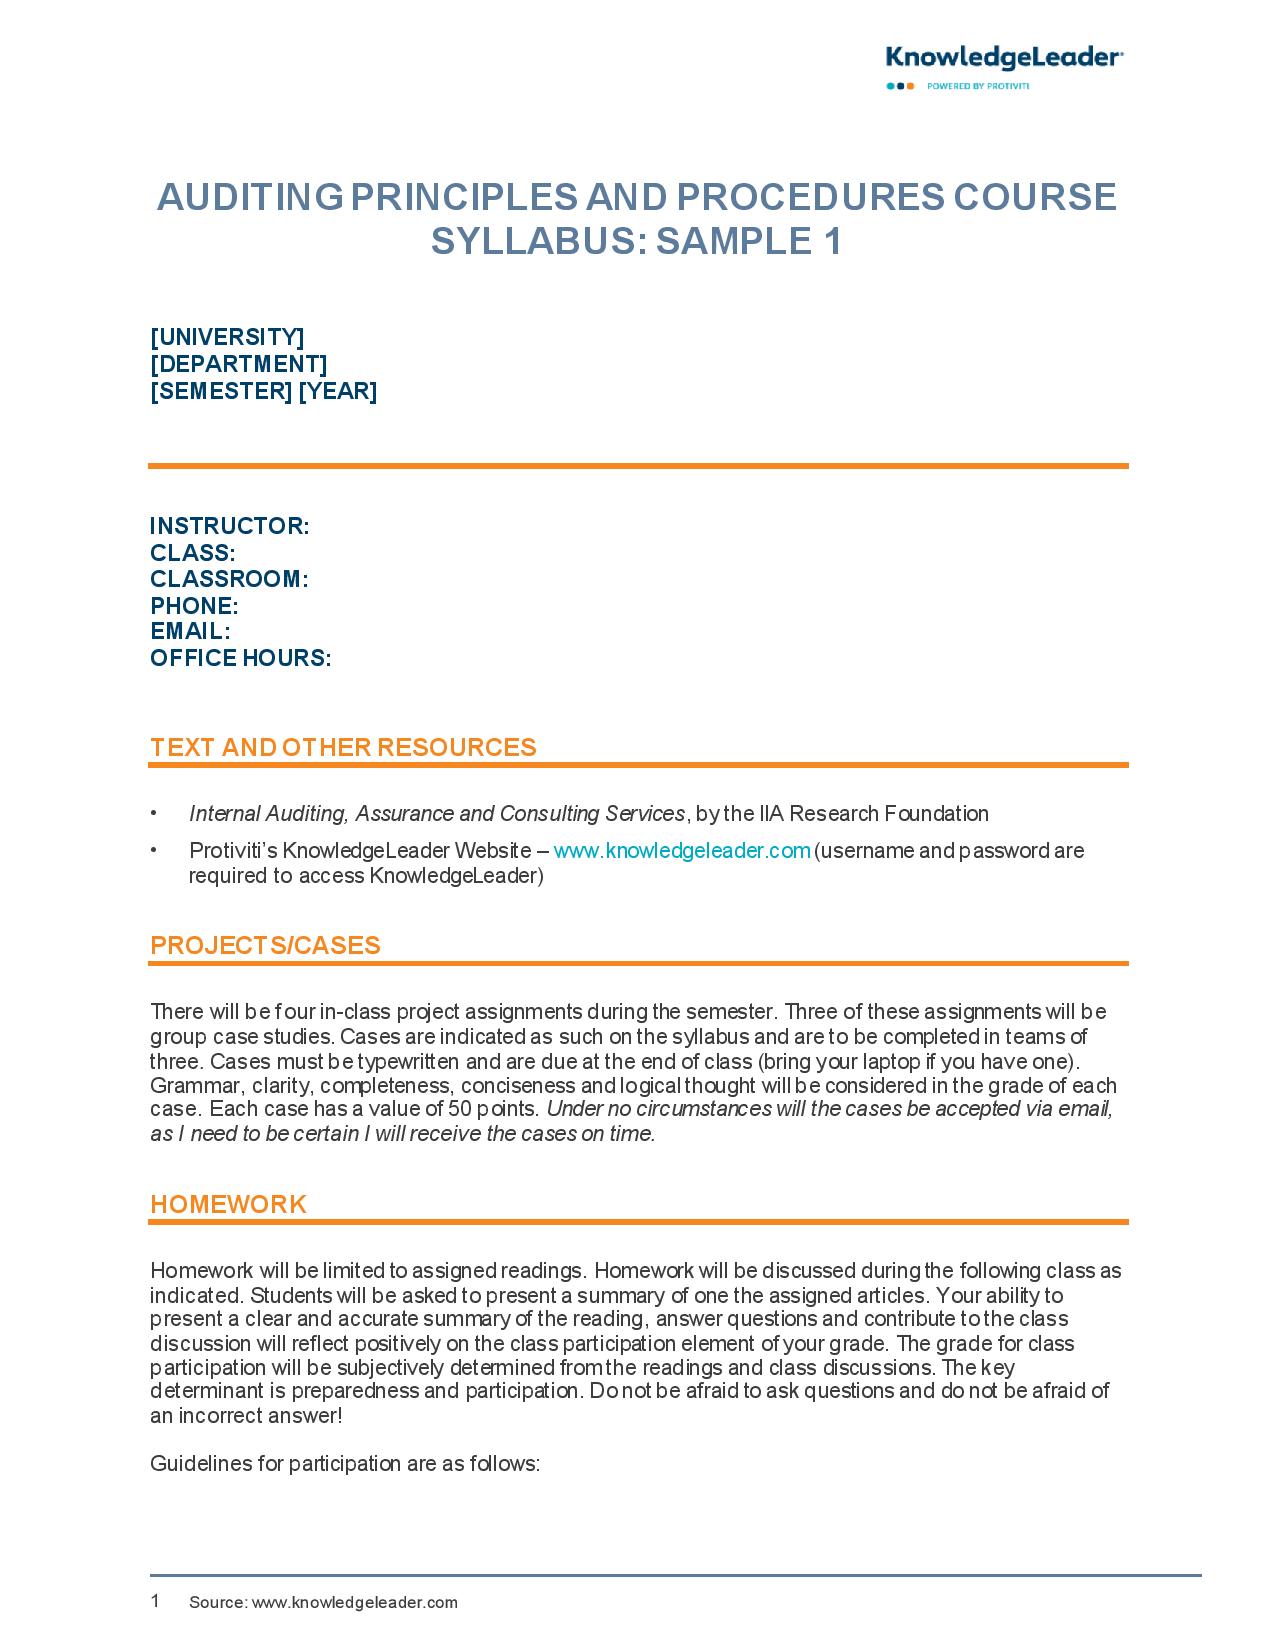 Screenshot of the first image of Auditing Principles and Procedures Course Syllabus Samples 1 and 2